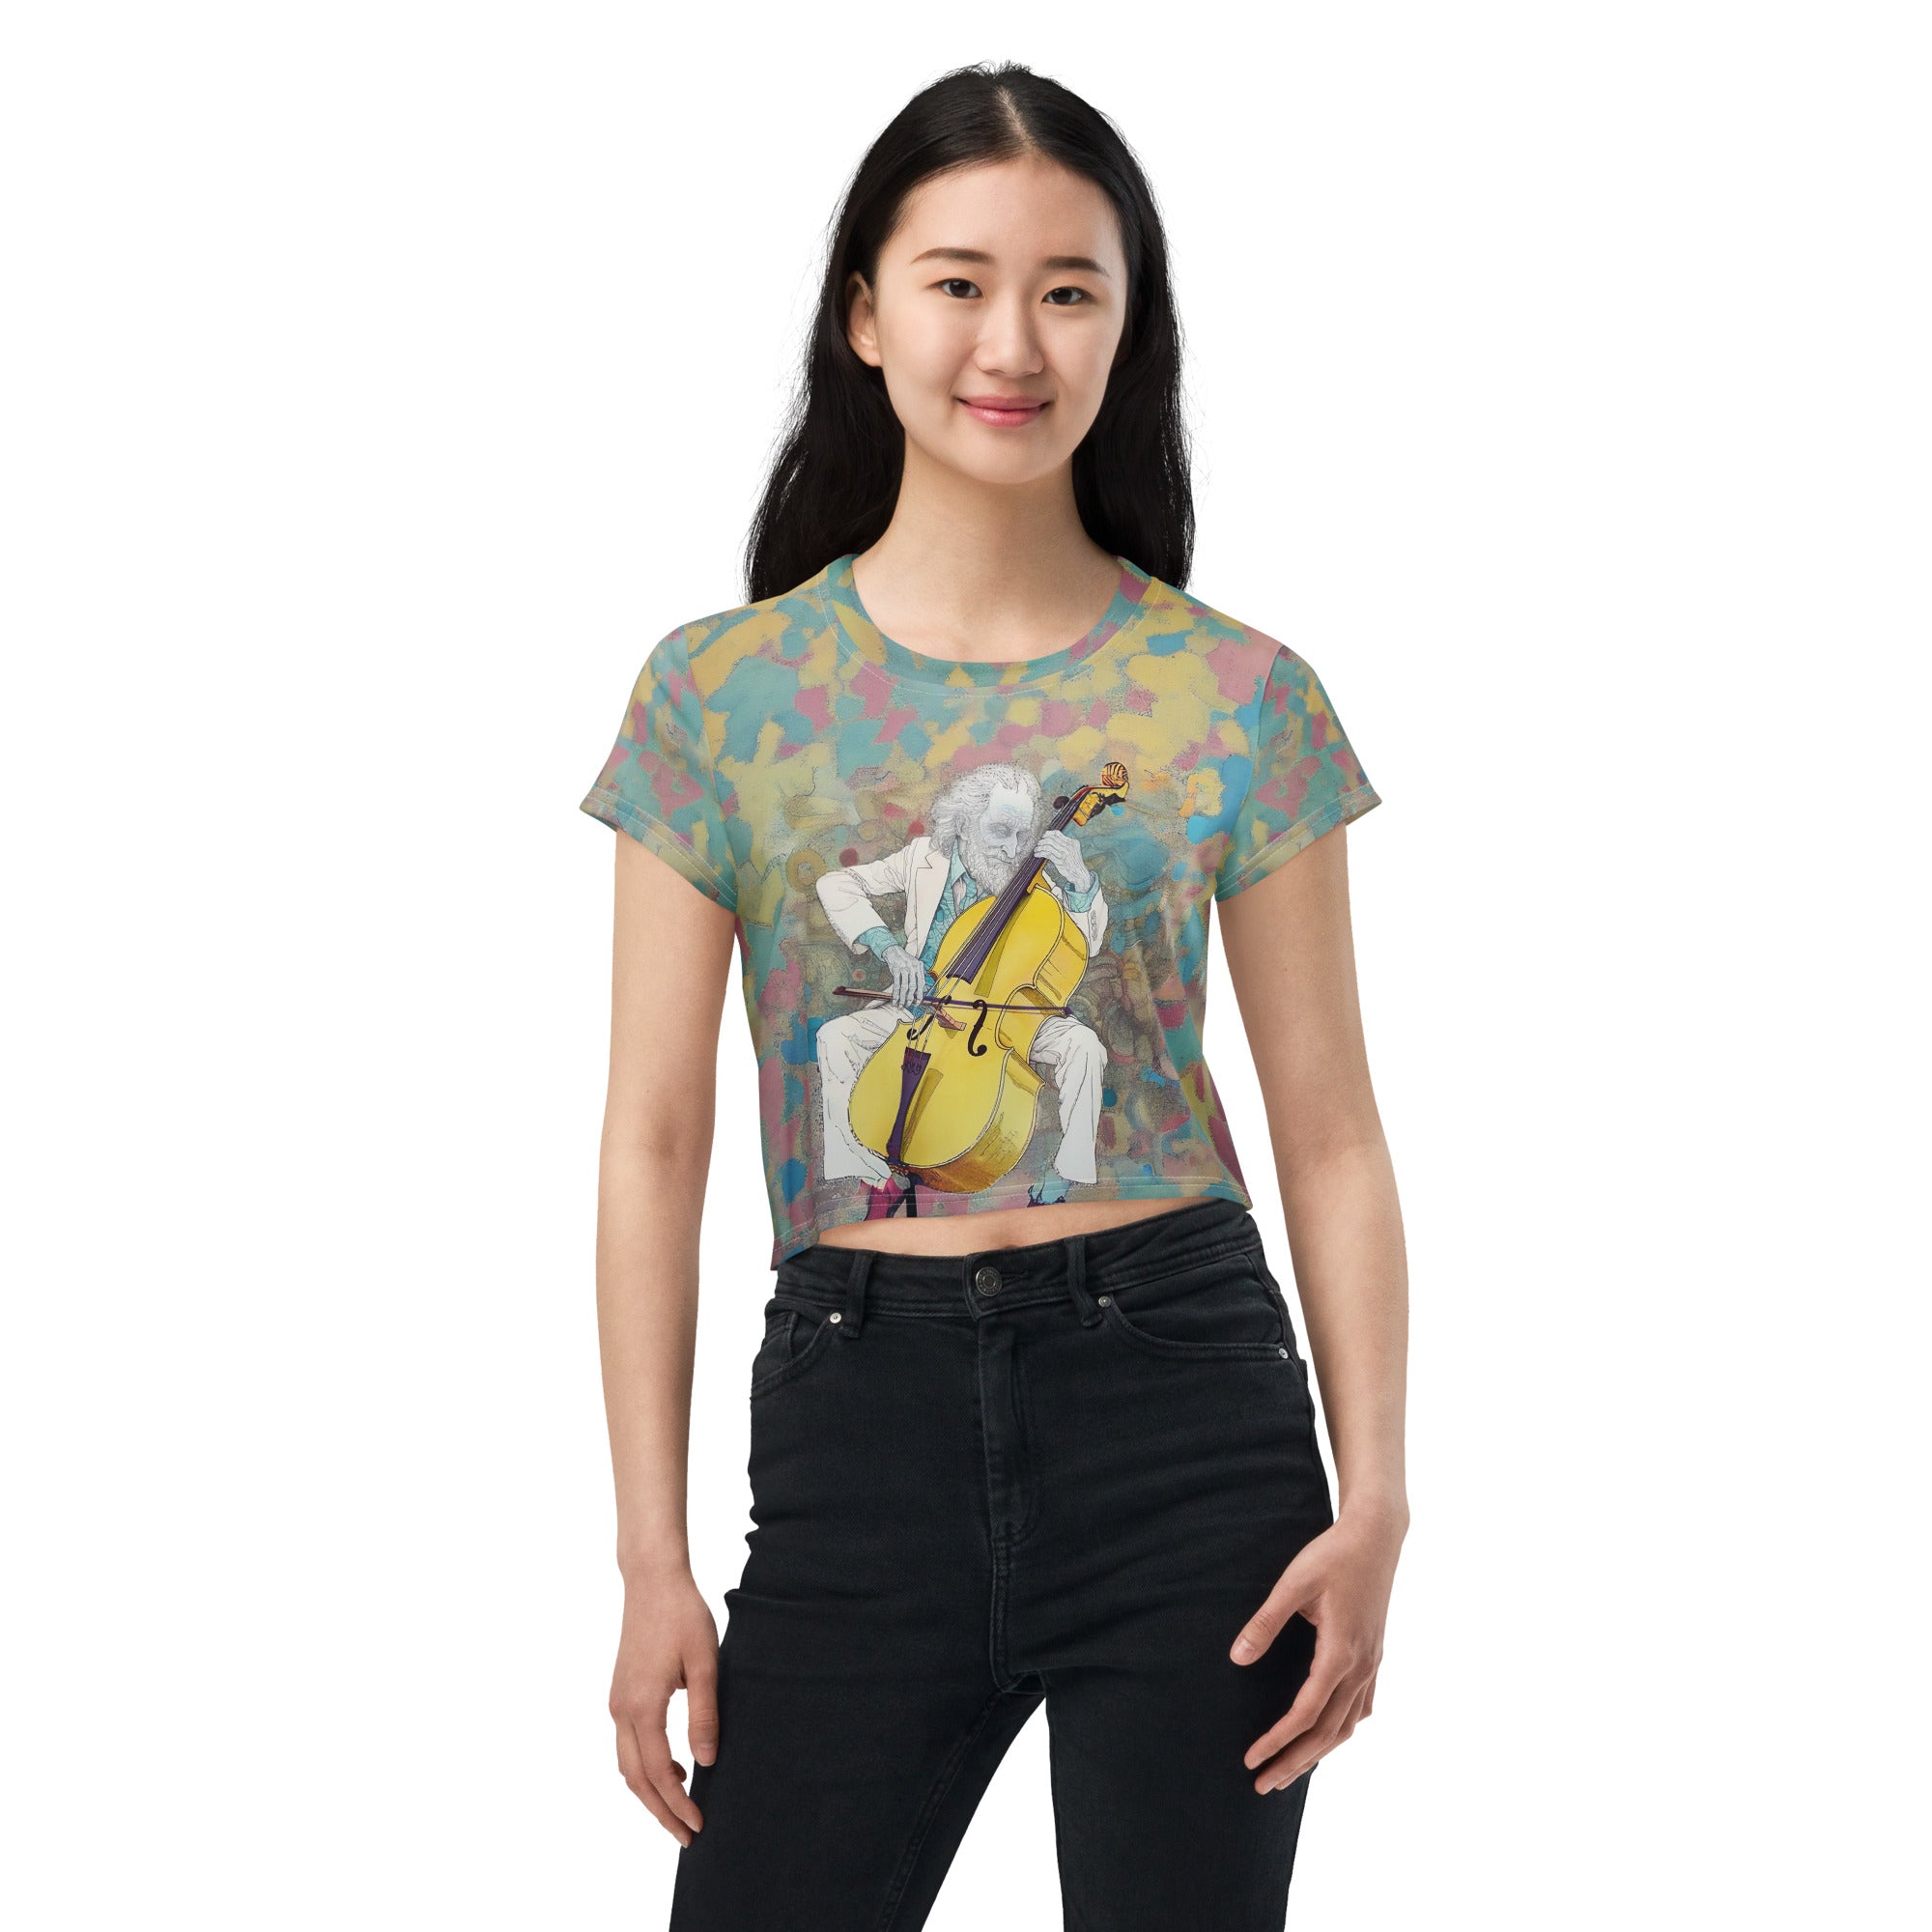 Sonic Pulse Women's Crop T-Shirt with a vibrant, modern pattern.